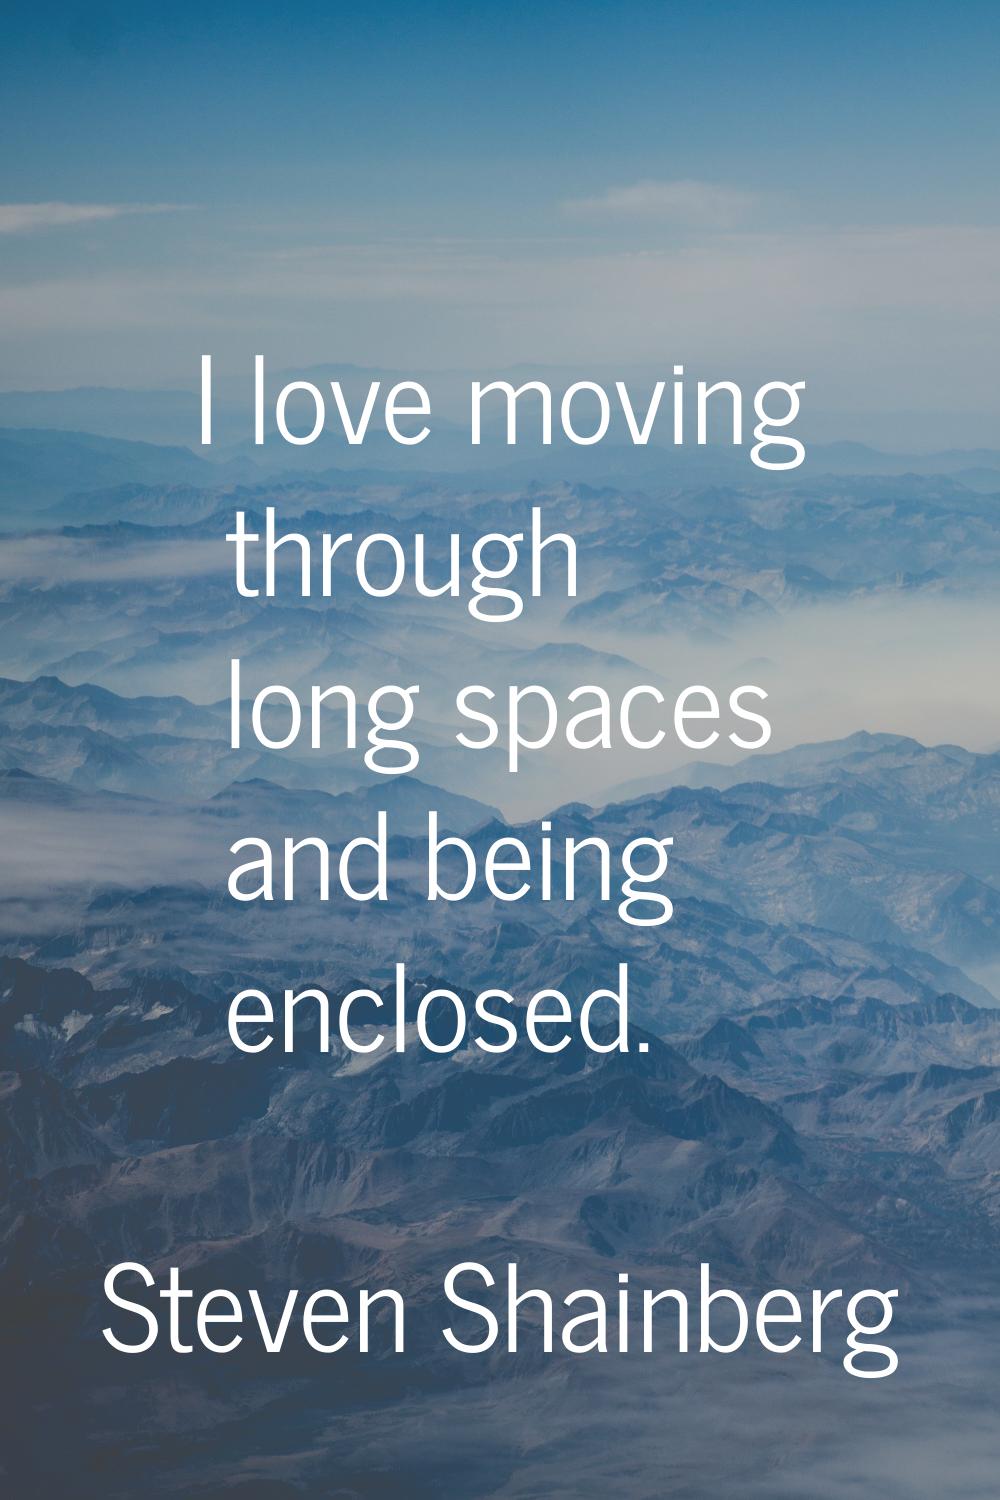 I love moving through long spaces and being enclosed.